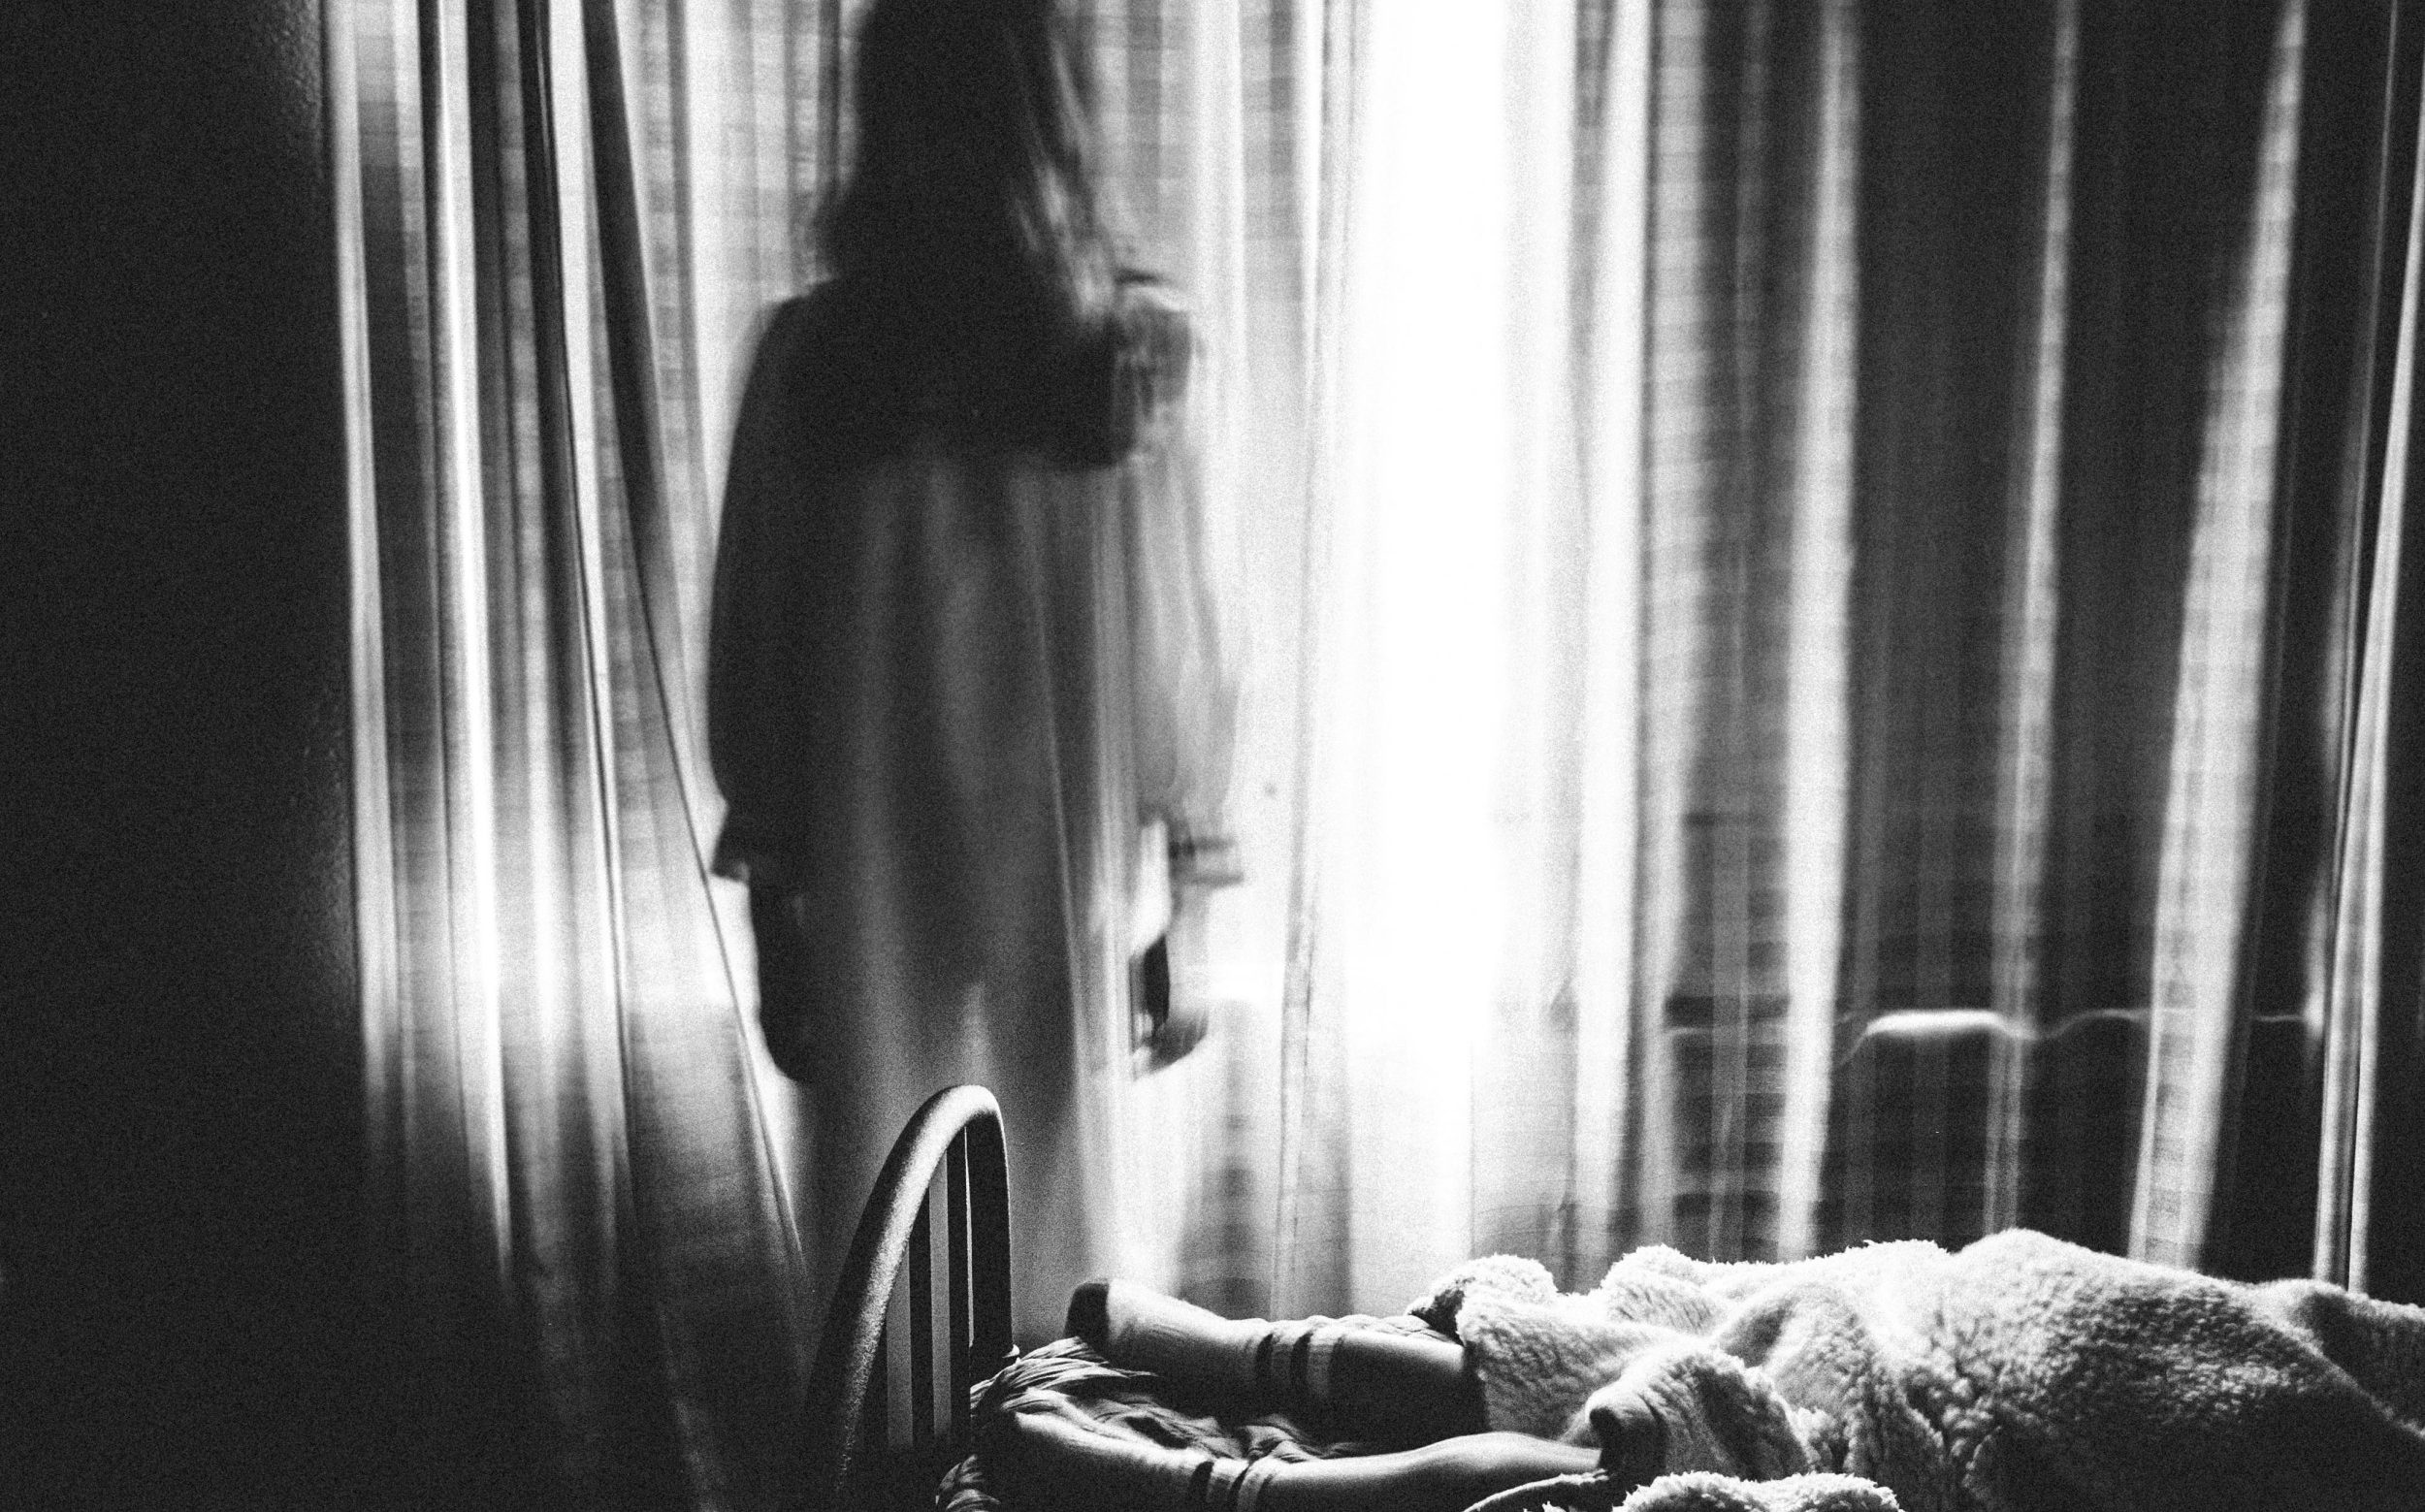 a shadowy figure at the end of your bed? there’s an entirely rational explanation